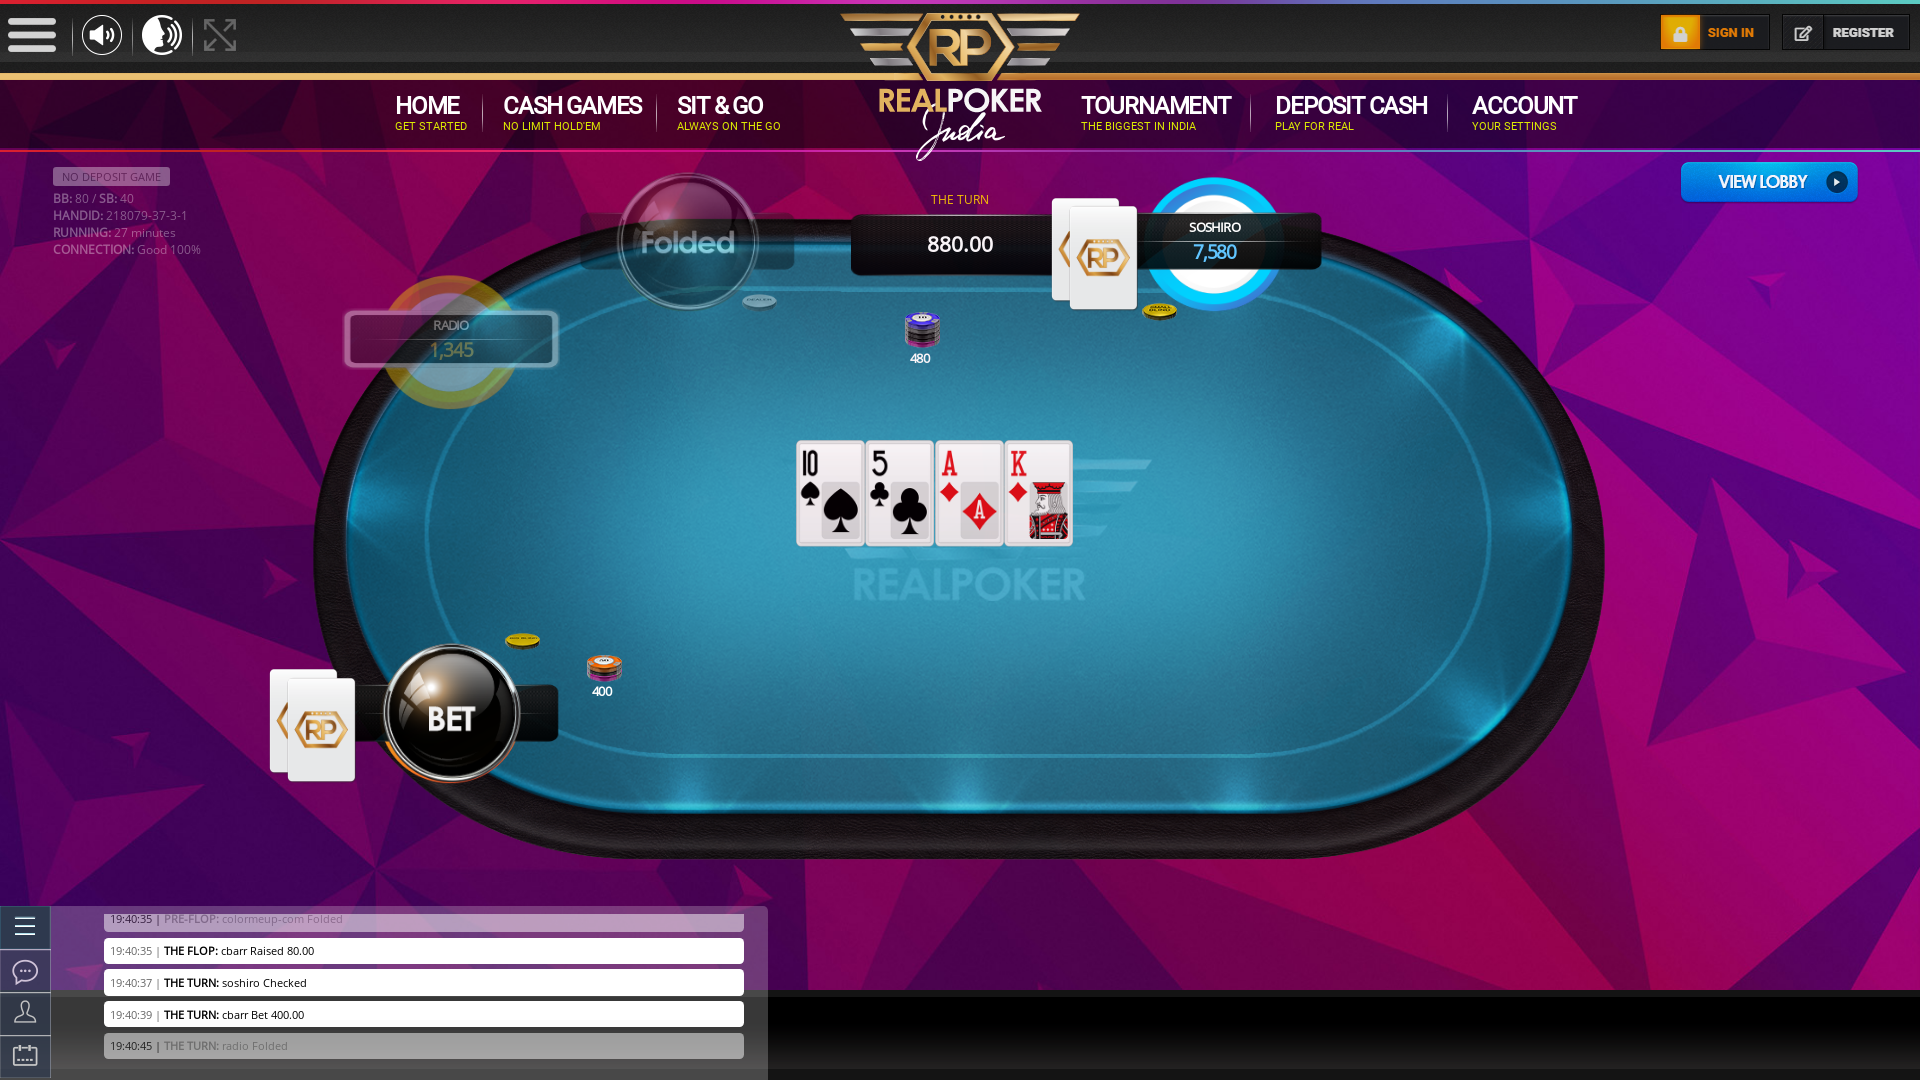 Indian online poker on a 10 player table in the 26th minute match up